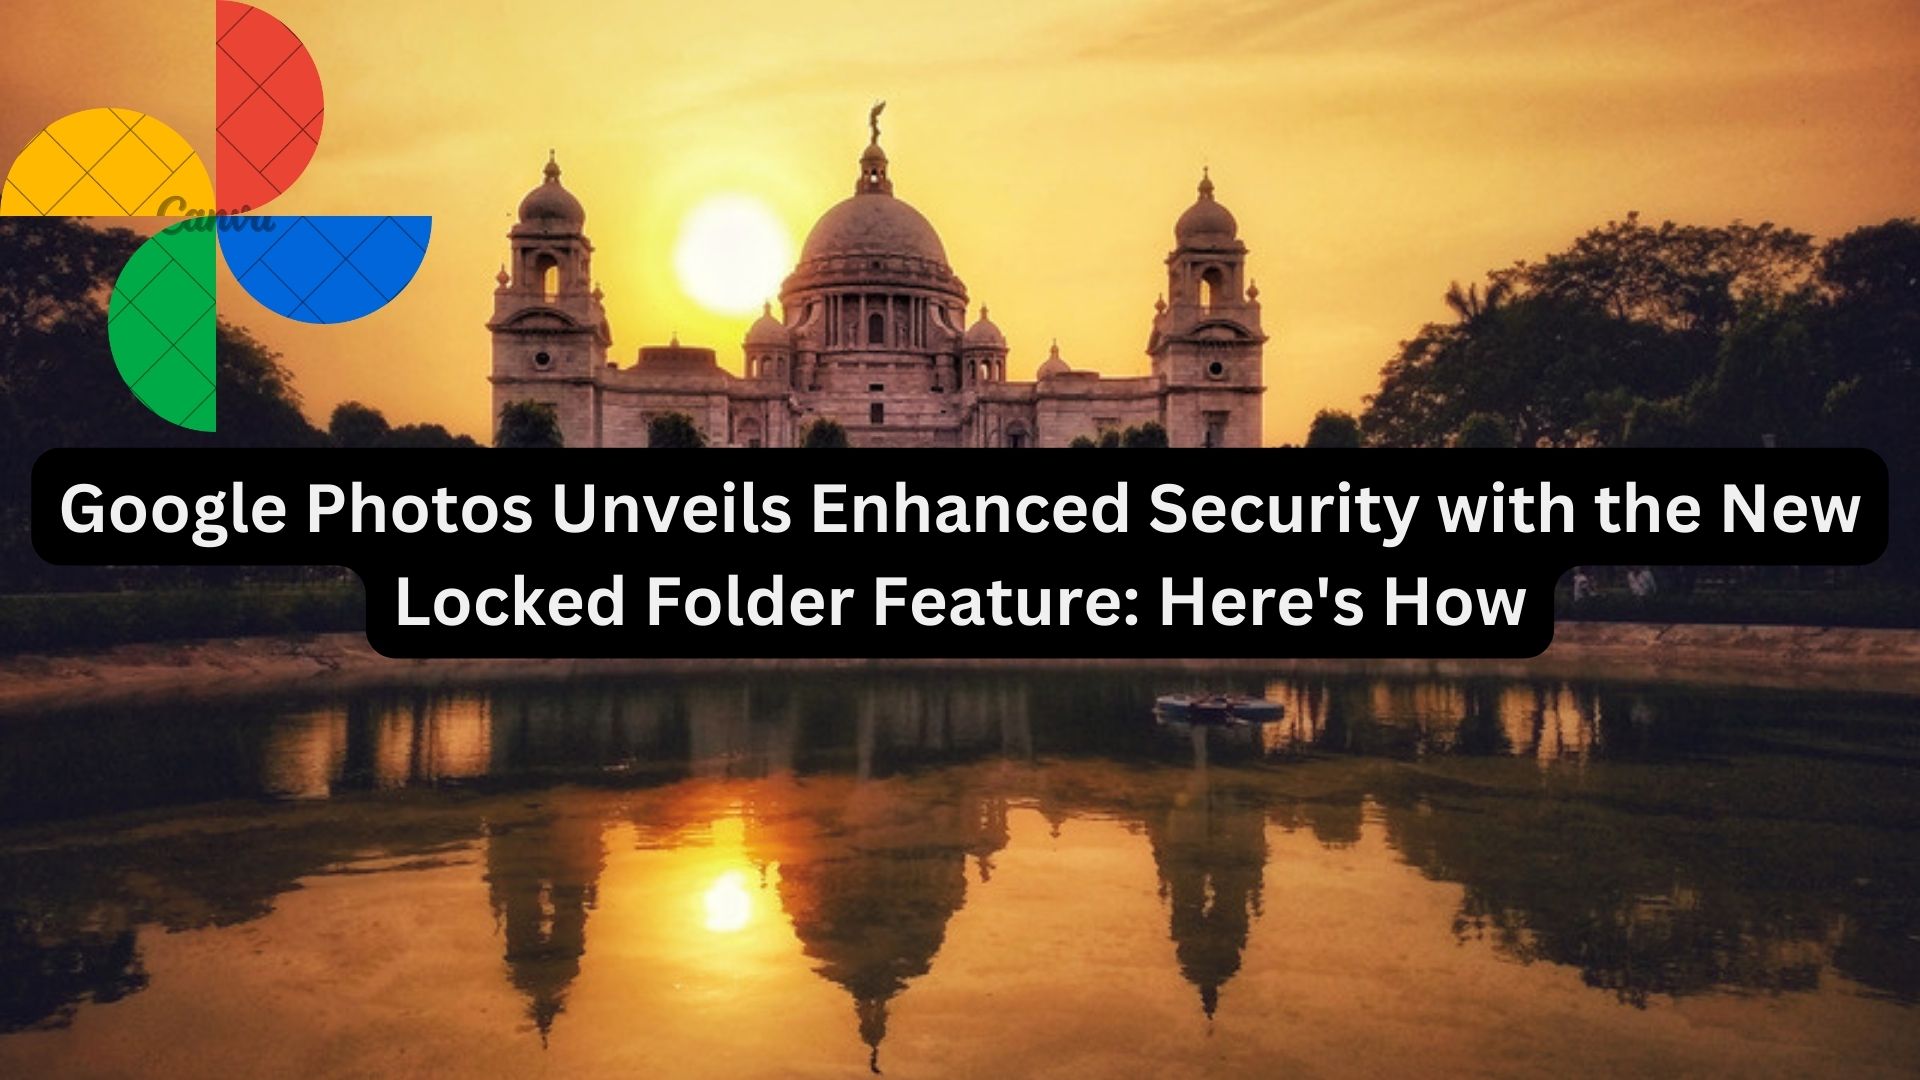 Google Photos Unveils Enhanced Security with the New Locked Folder Feature: Here's How